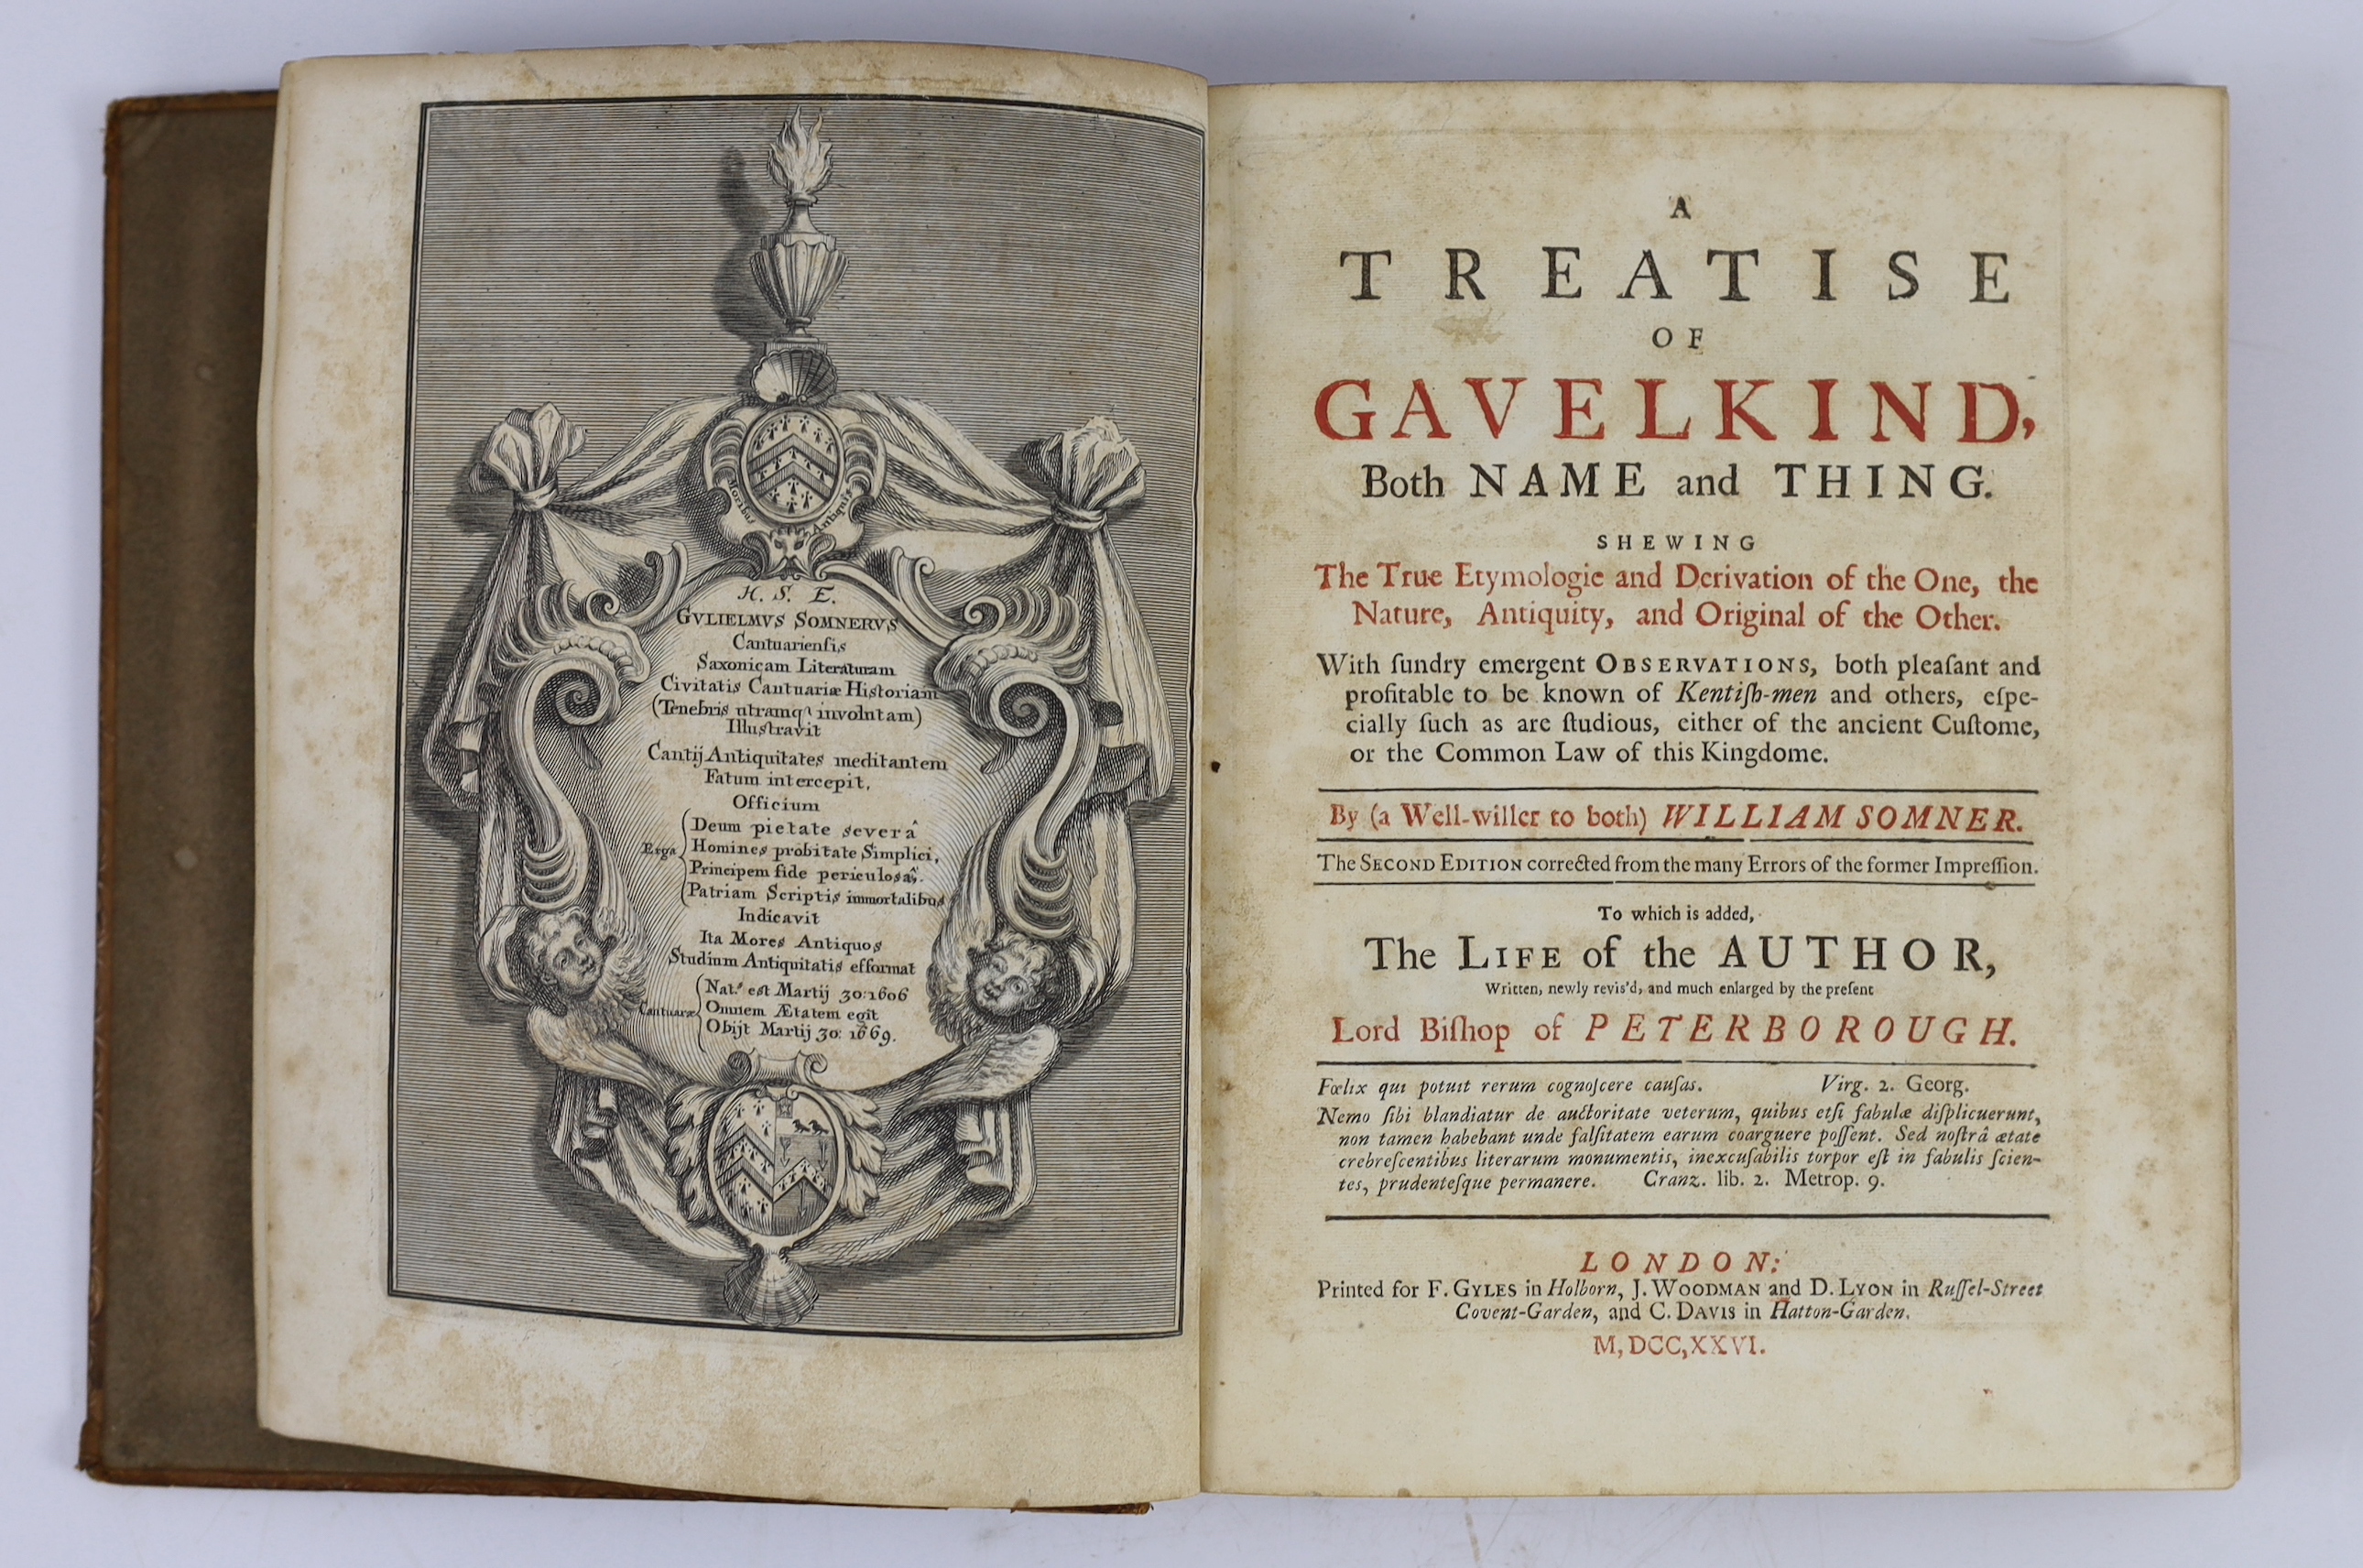 Somner, William - A Treatise of Gavelkind, both Name and Thing....2nd edition. corrected from the many errors of the former impression. To which is added, the Life of the Author....frontispiece, head and tailpiece decora